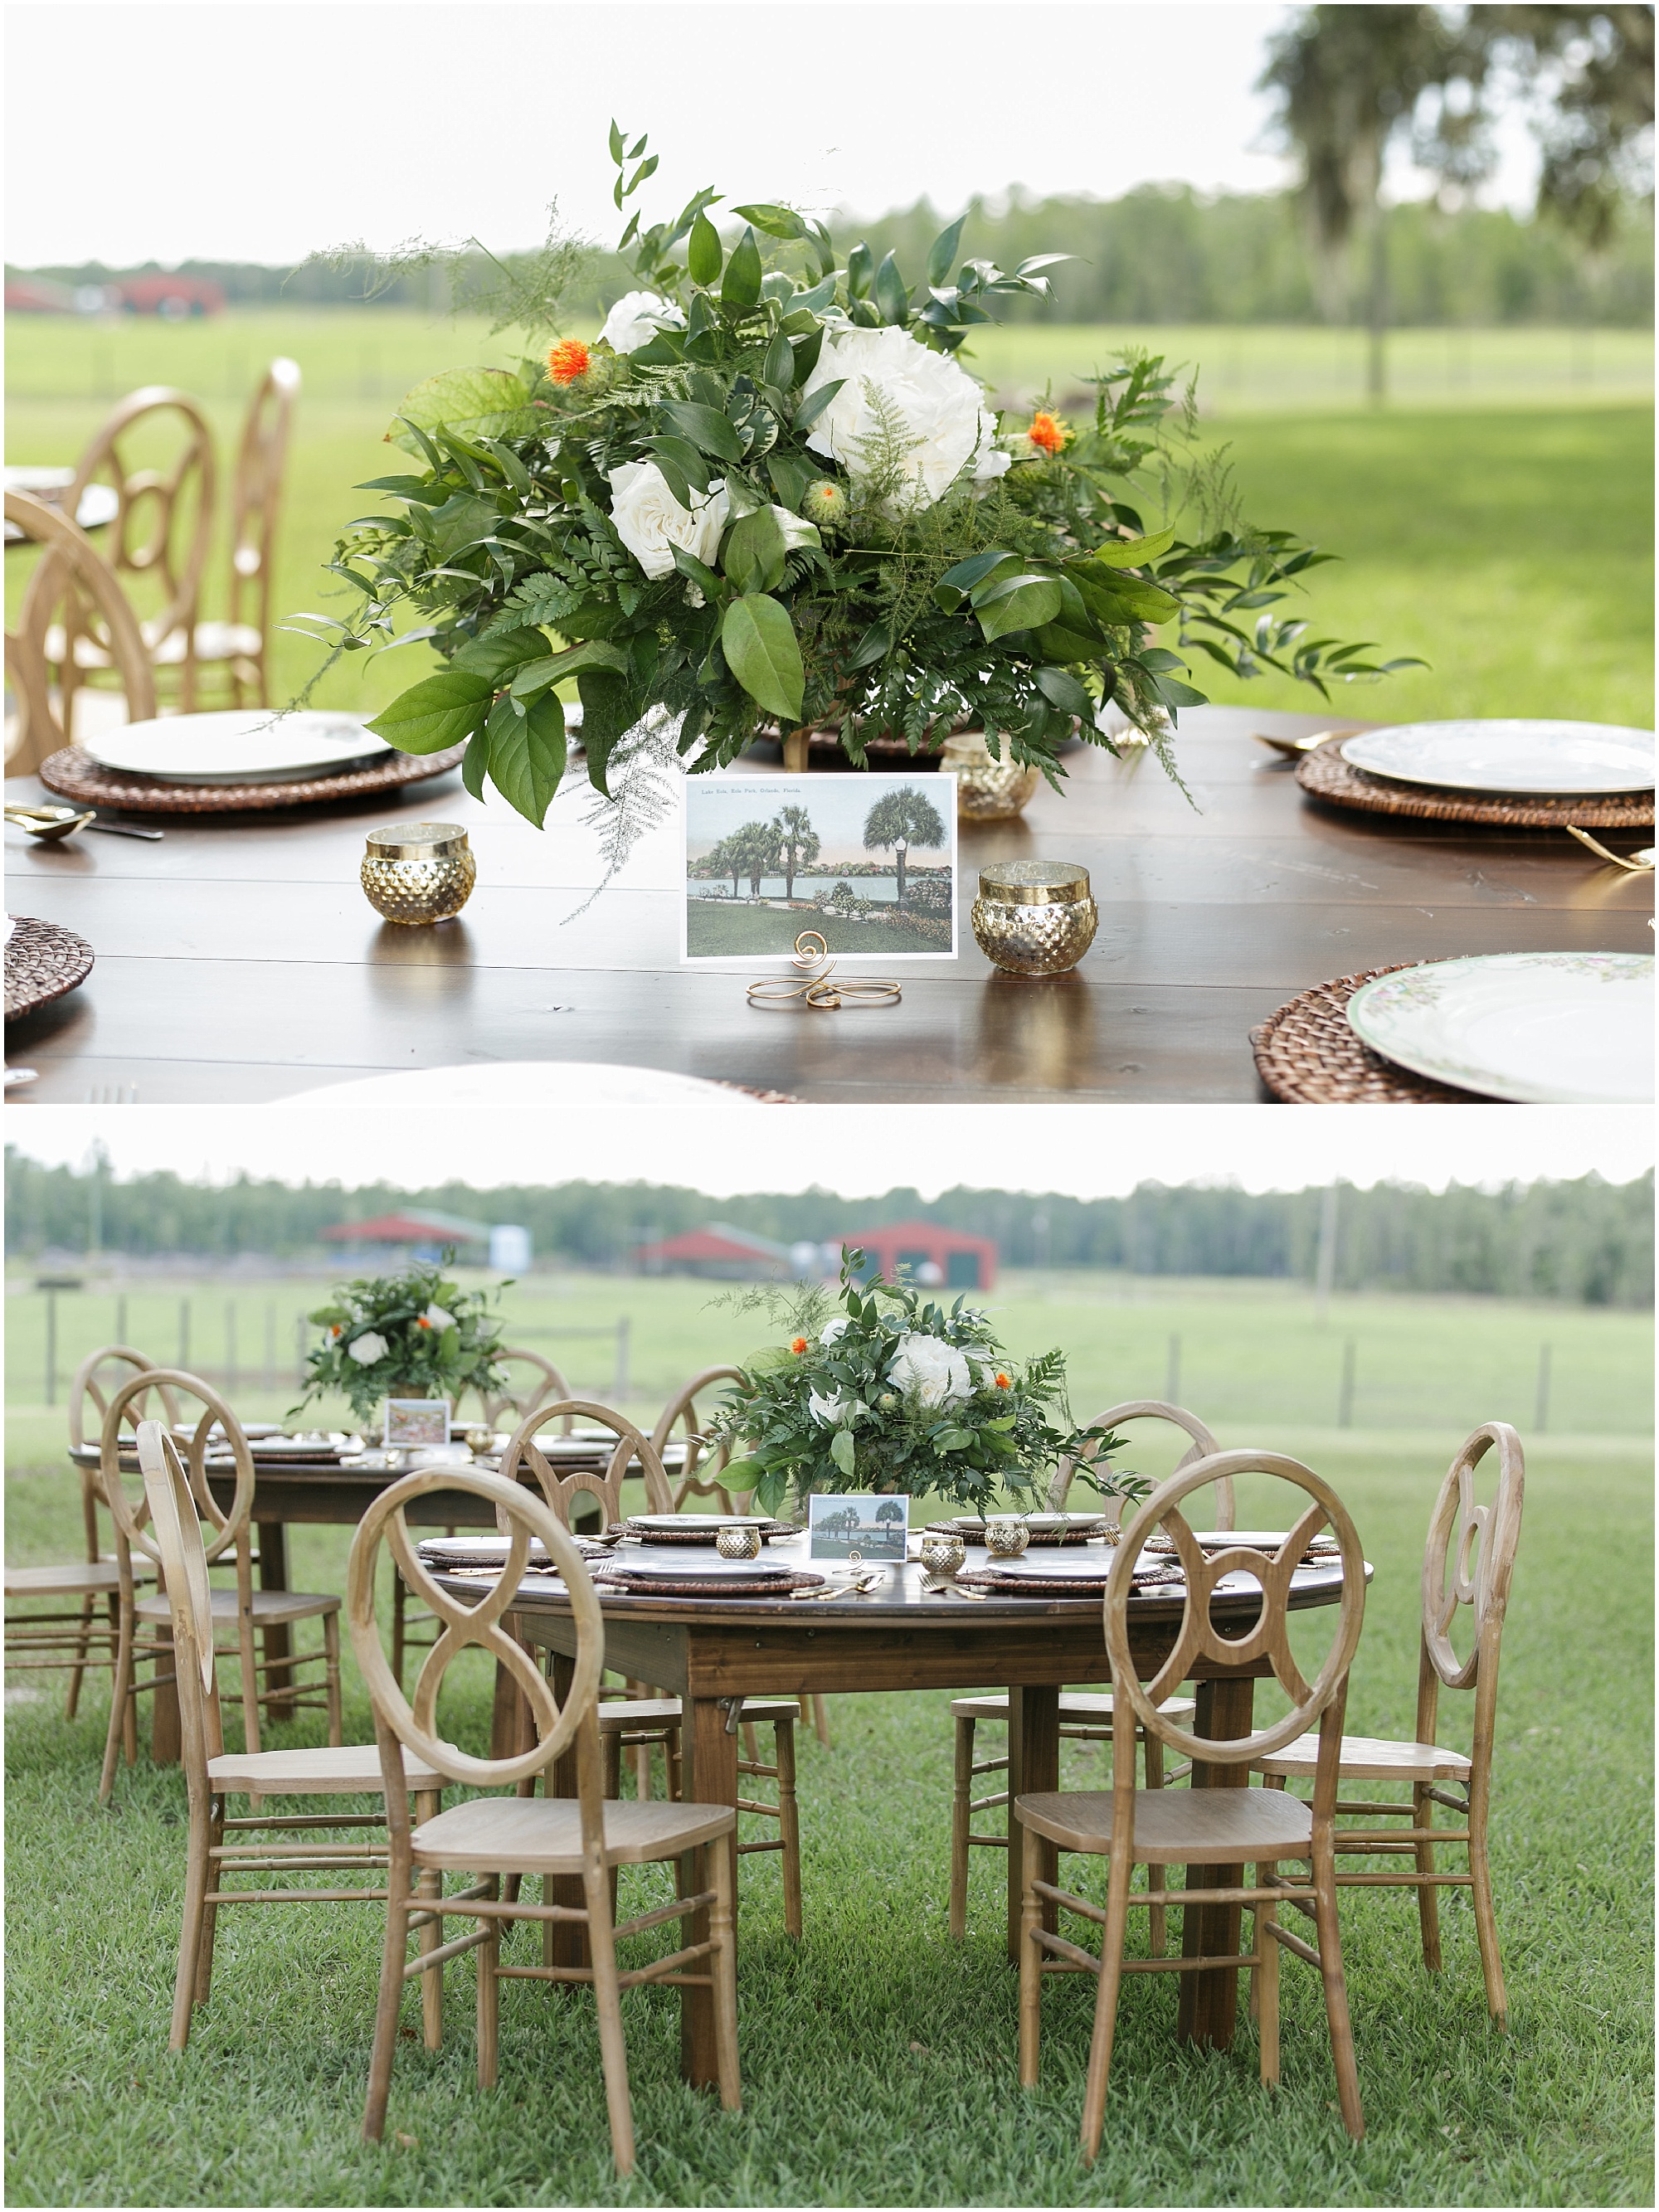 Reception table with greenery and white flowers for the centerpiece. 